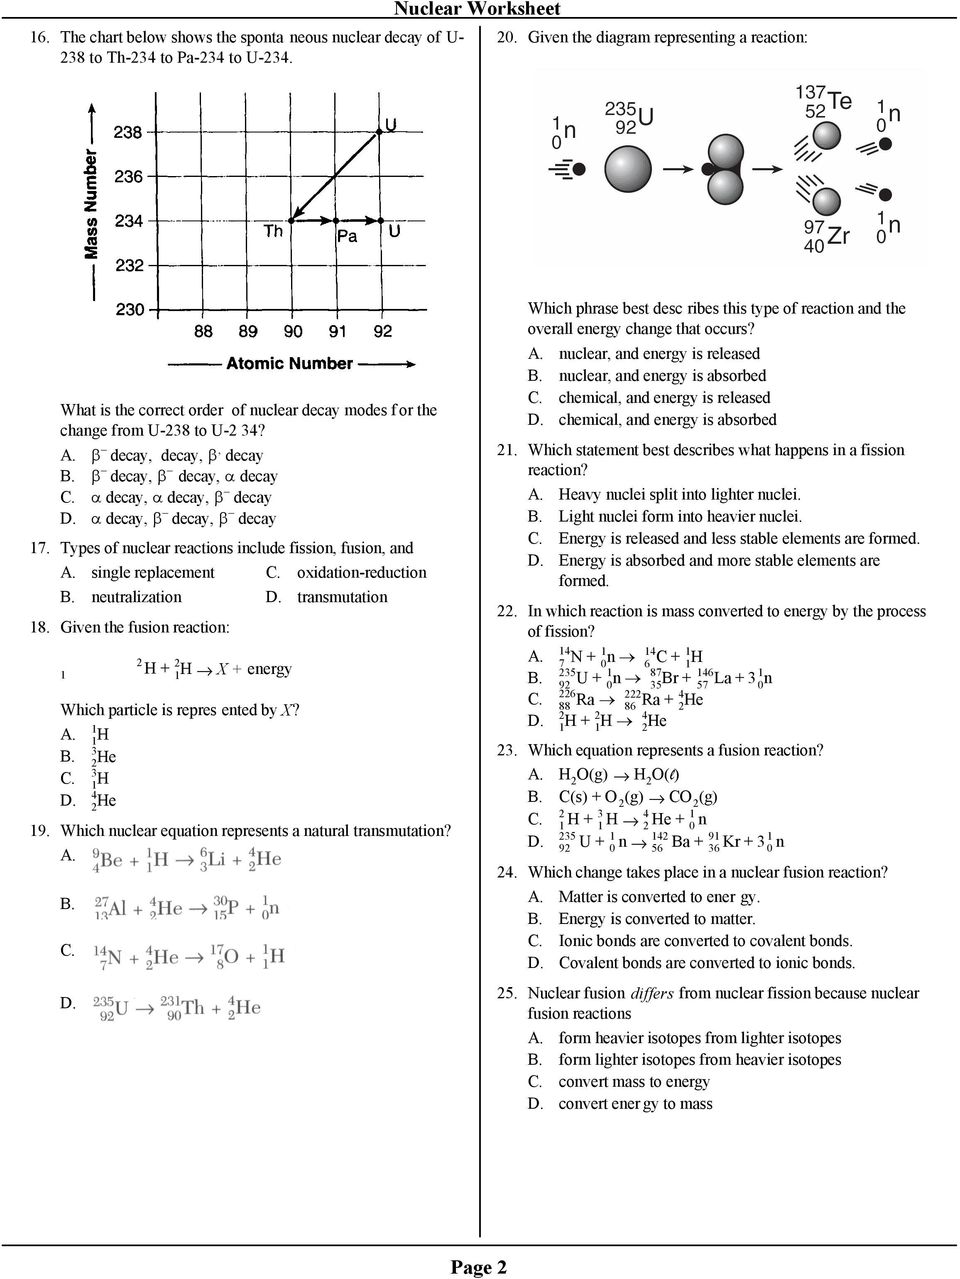 Regents Review Nuclear Worksheet Mr. Beauchamp - PDF Free Download In Nuclear Decay Worksheet Answer Key